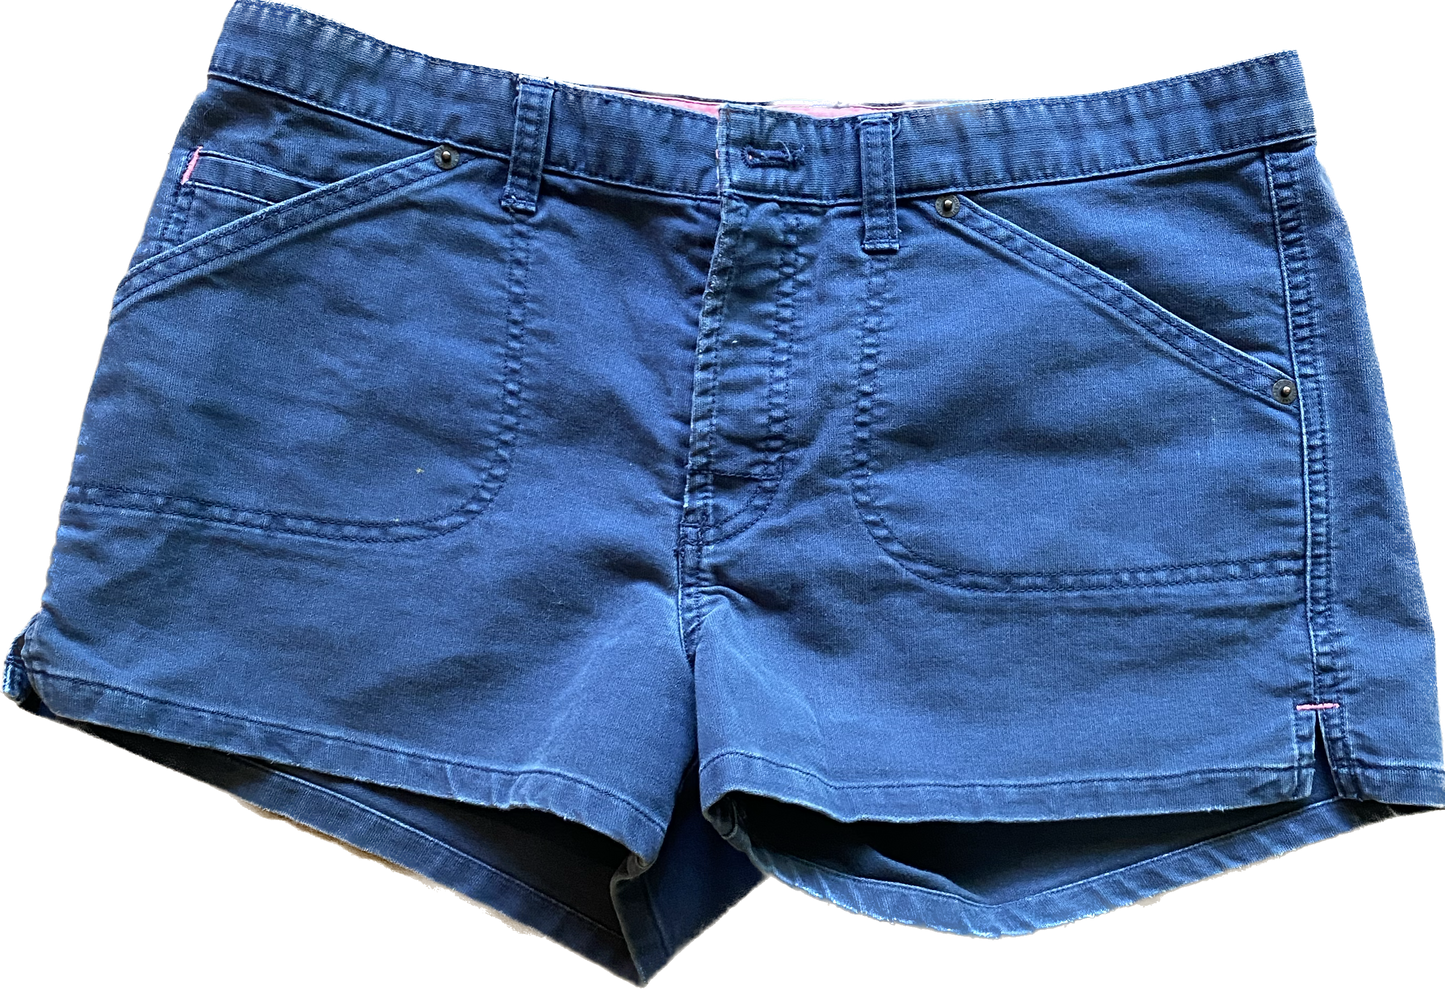 Size 10 Women’s Abercrombie button fly shorts, navy